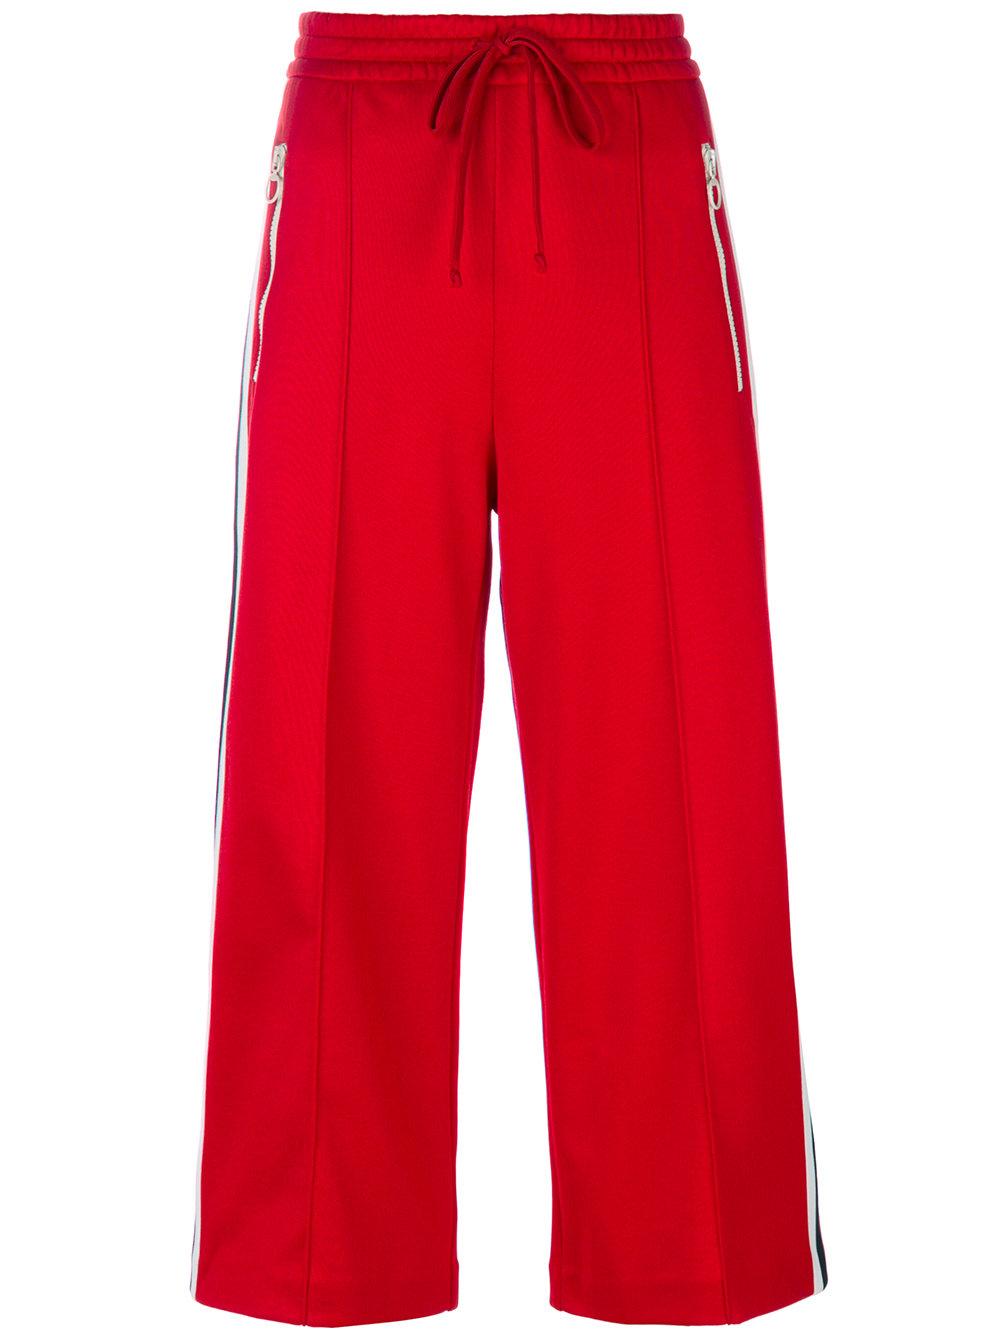 Lyst - Gucci Wide-leg Jogging Pants in Red